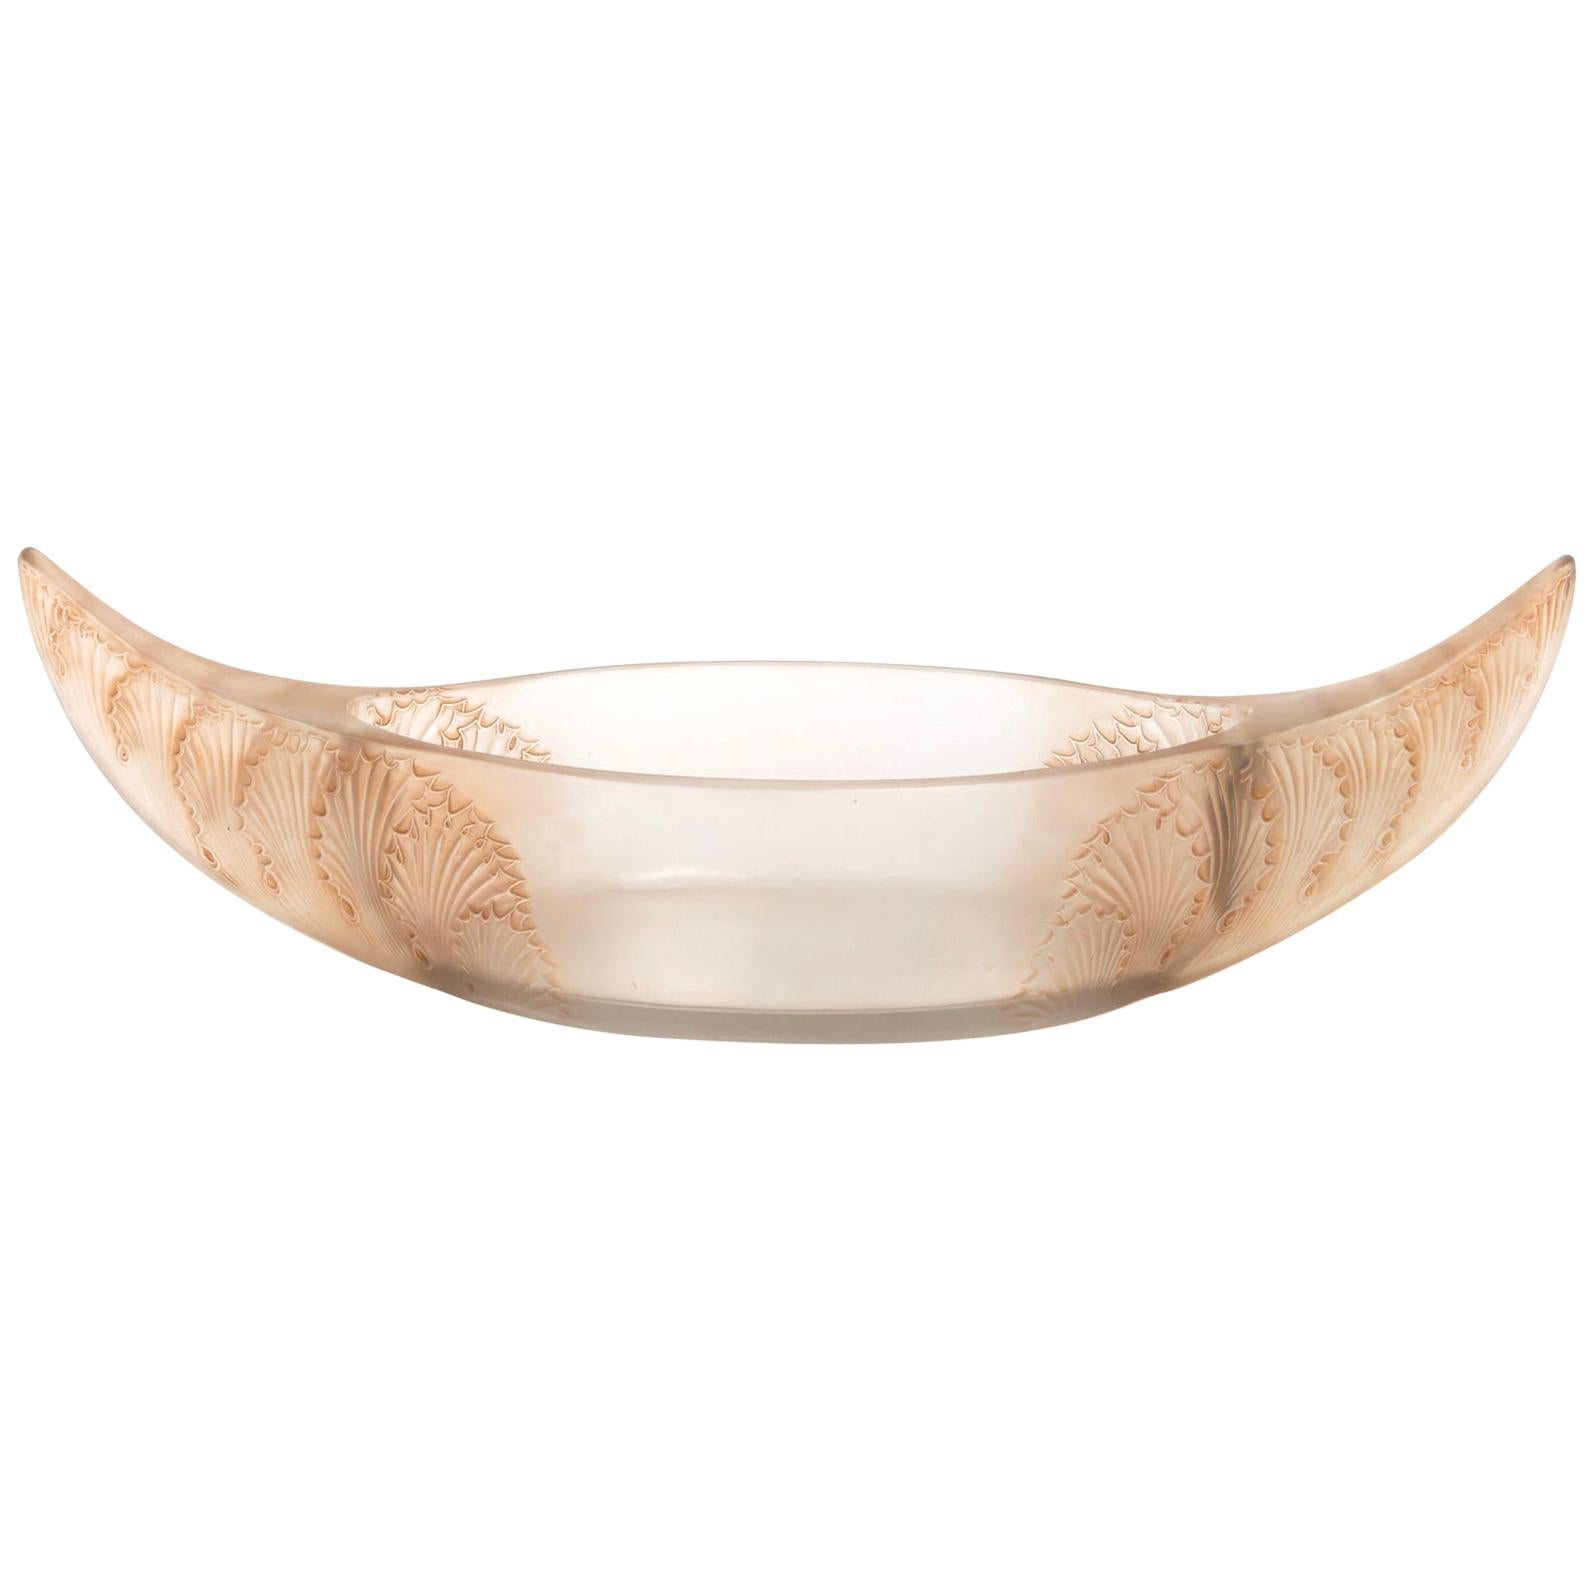 1927 René Lalique Acanthes Jardinière Bowl Frosted Glass with Sepia Patina